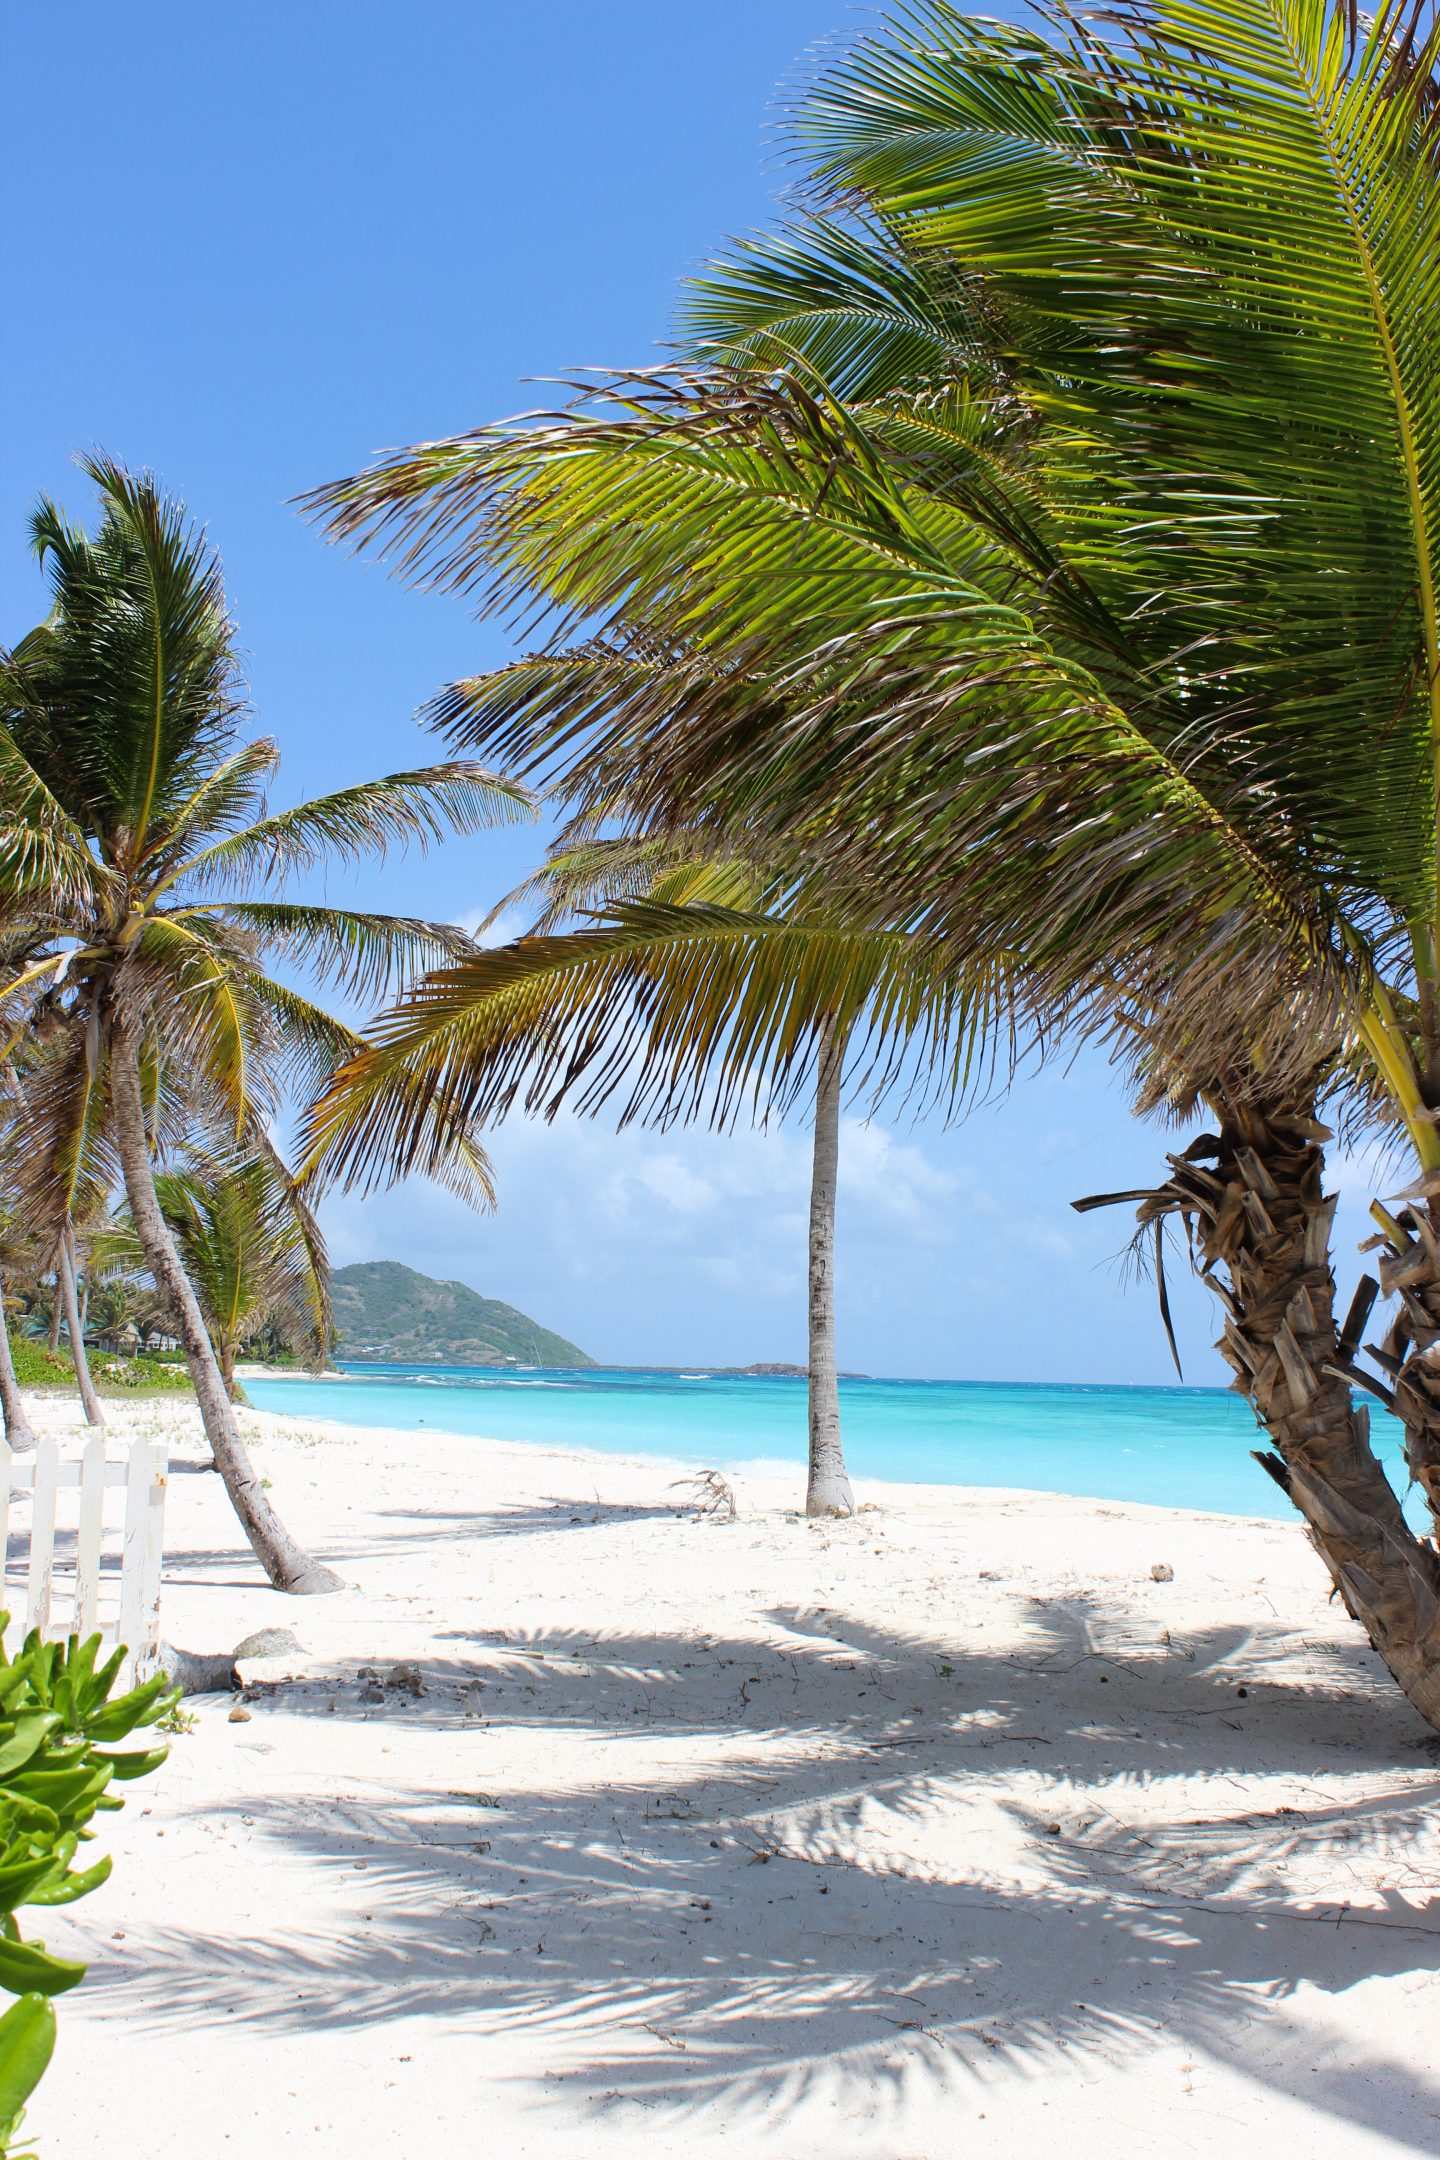 Clutch and carry on - UK Travel blogger - palm island resort, grenadines (108 of 361)